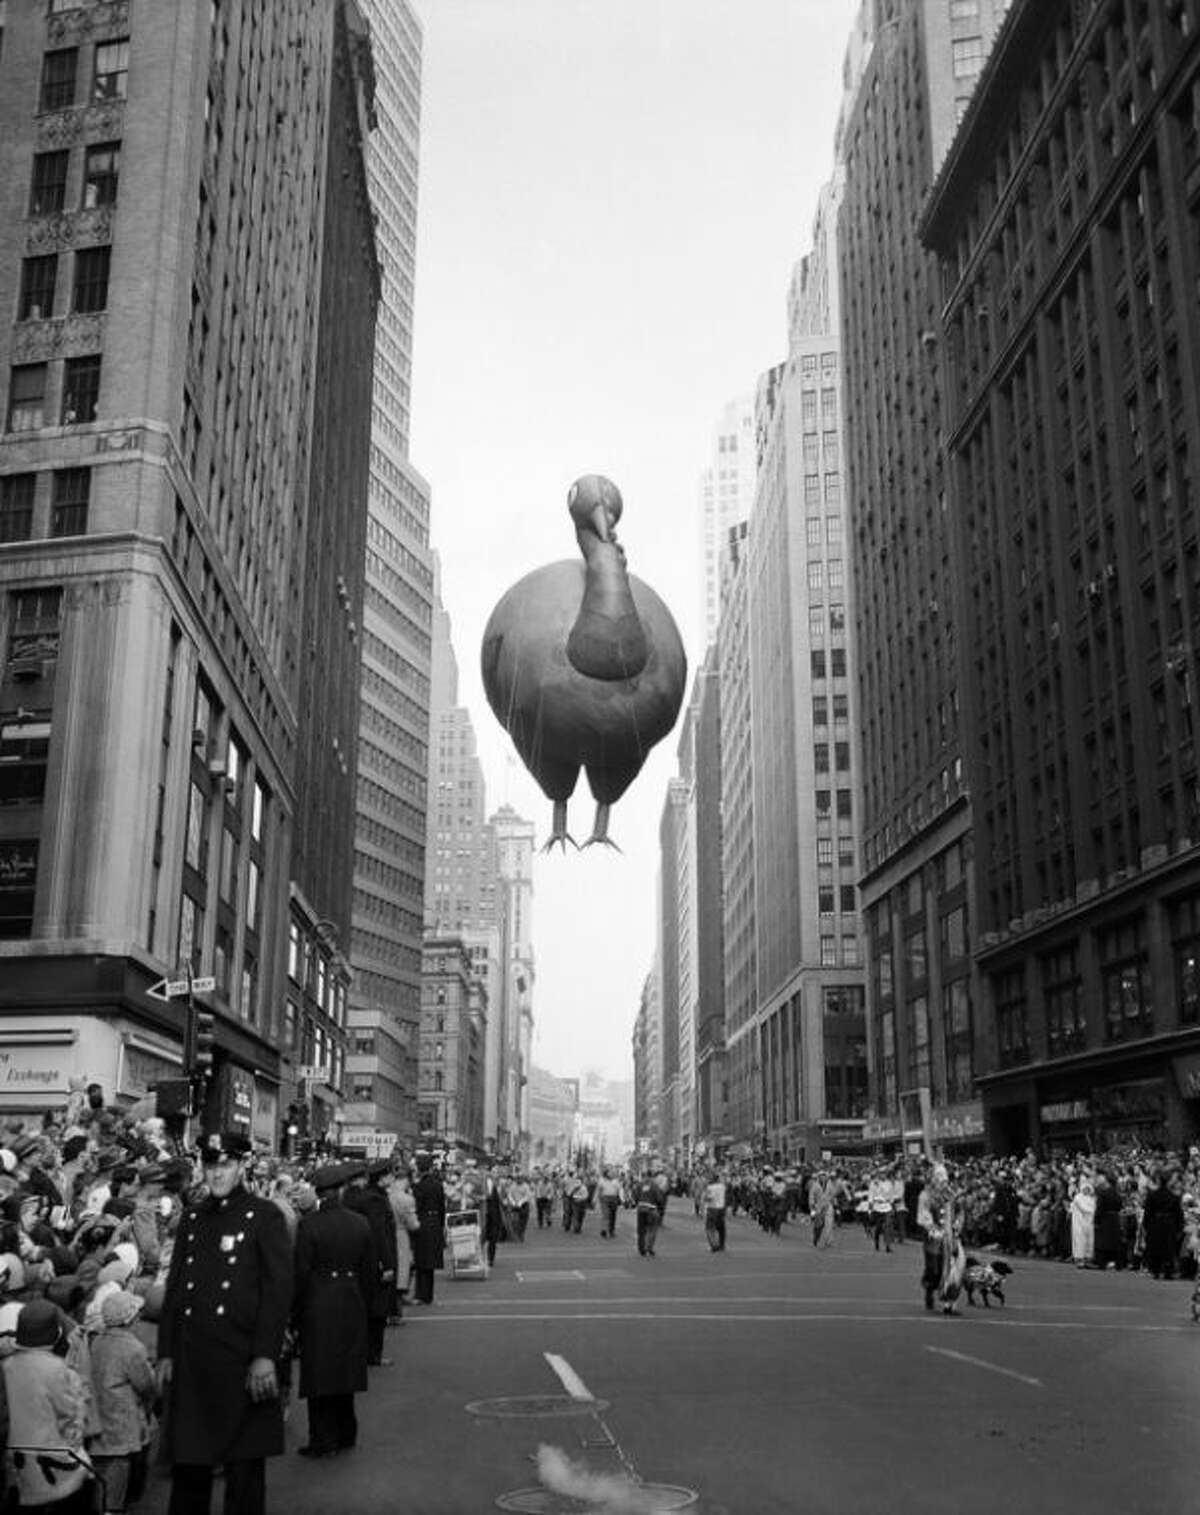 1957 - A giant turkey float squeezes between buildings as the 31st annual Macy's Thanksgiving Day Parade moves down Broadway near 37th Street in New York, Nov. 28, 1957. The parade's first giant balloons debuted in 1927. (AP Photo/John Lindsay, File)